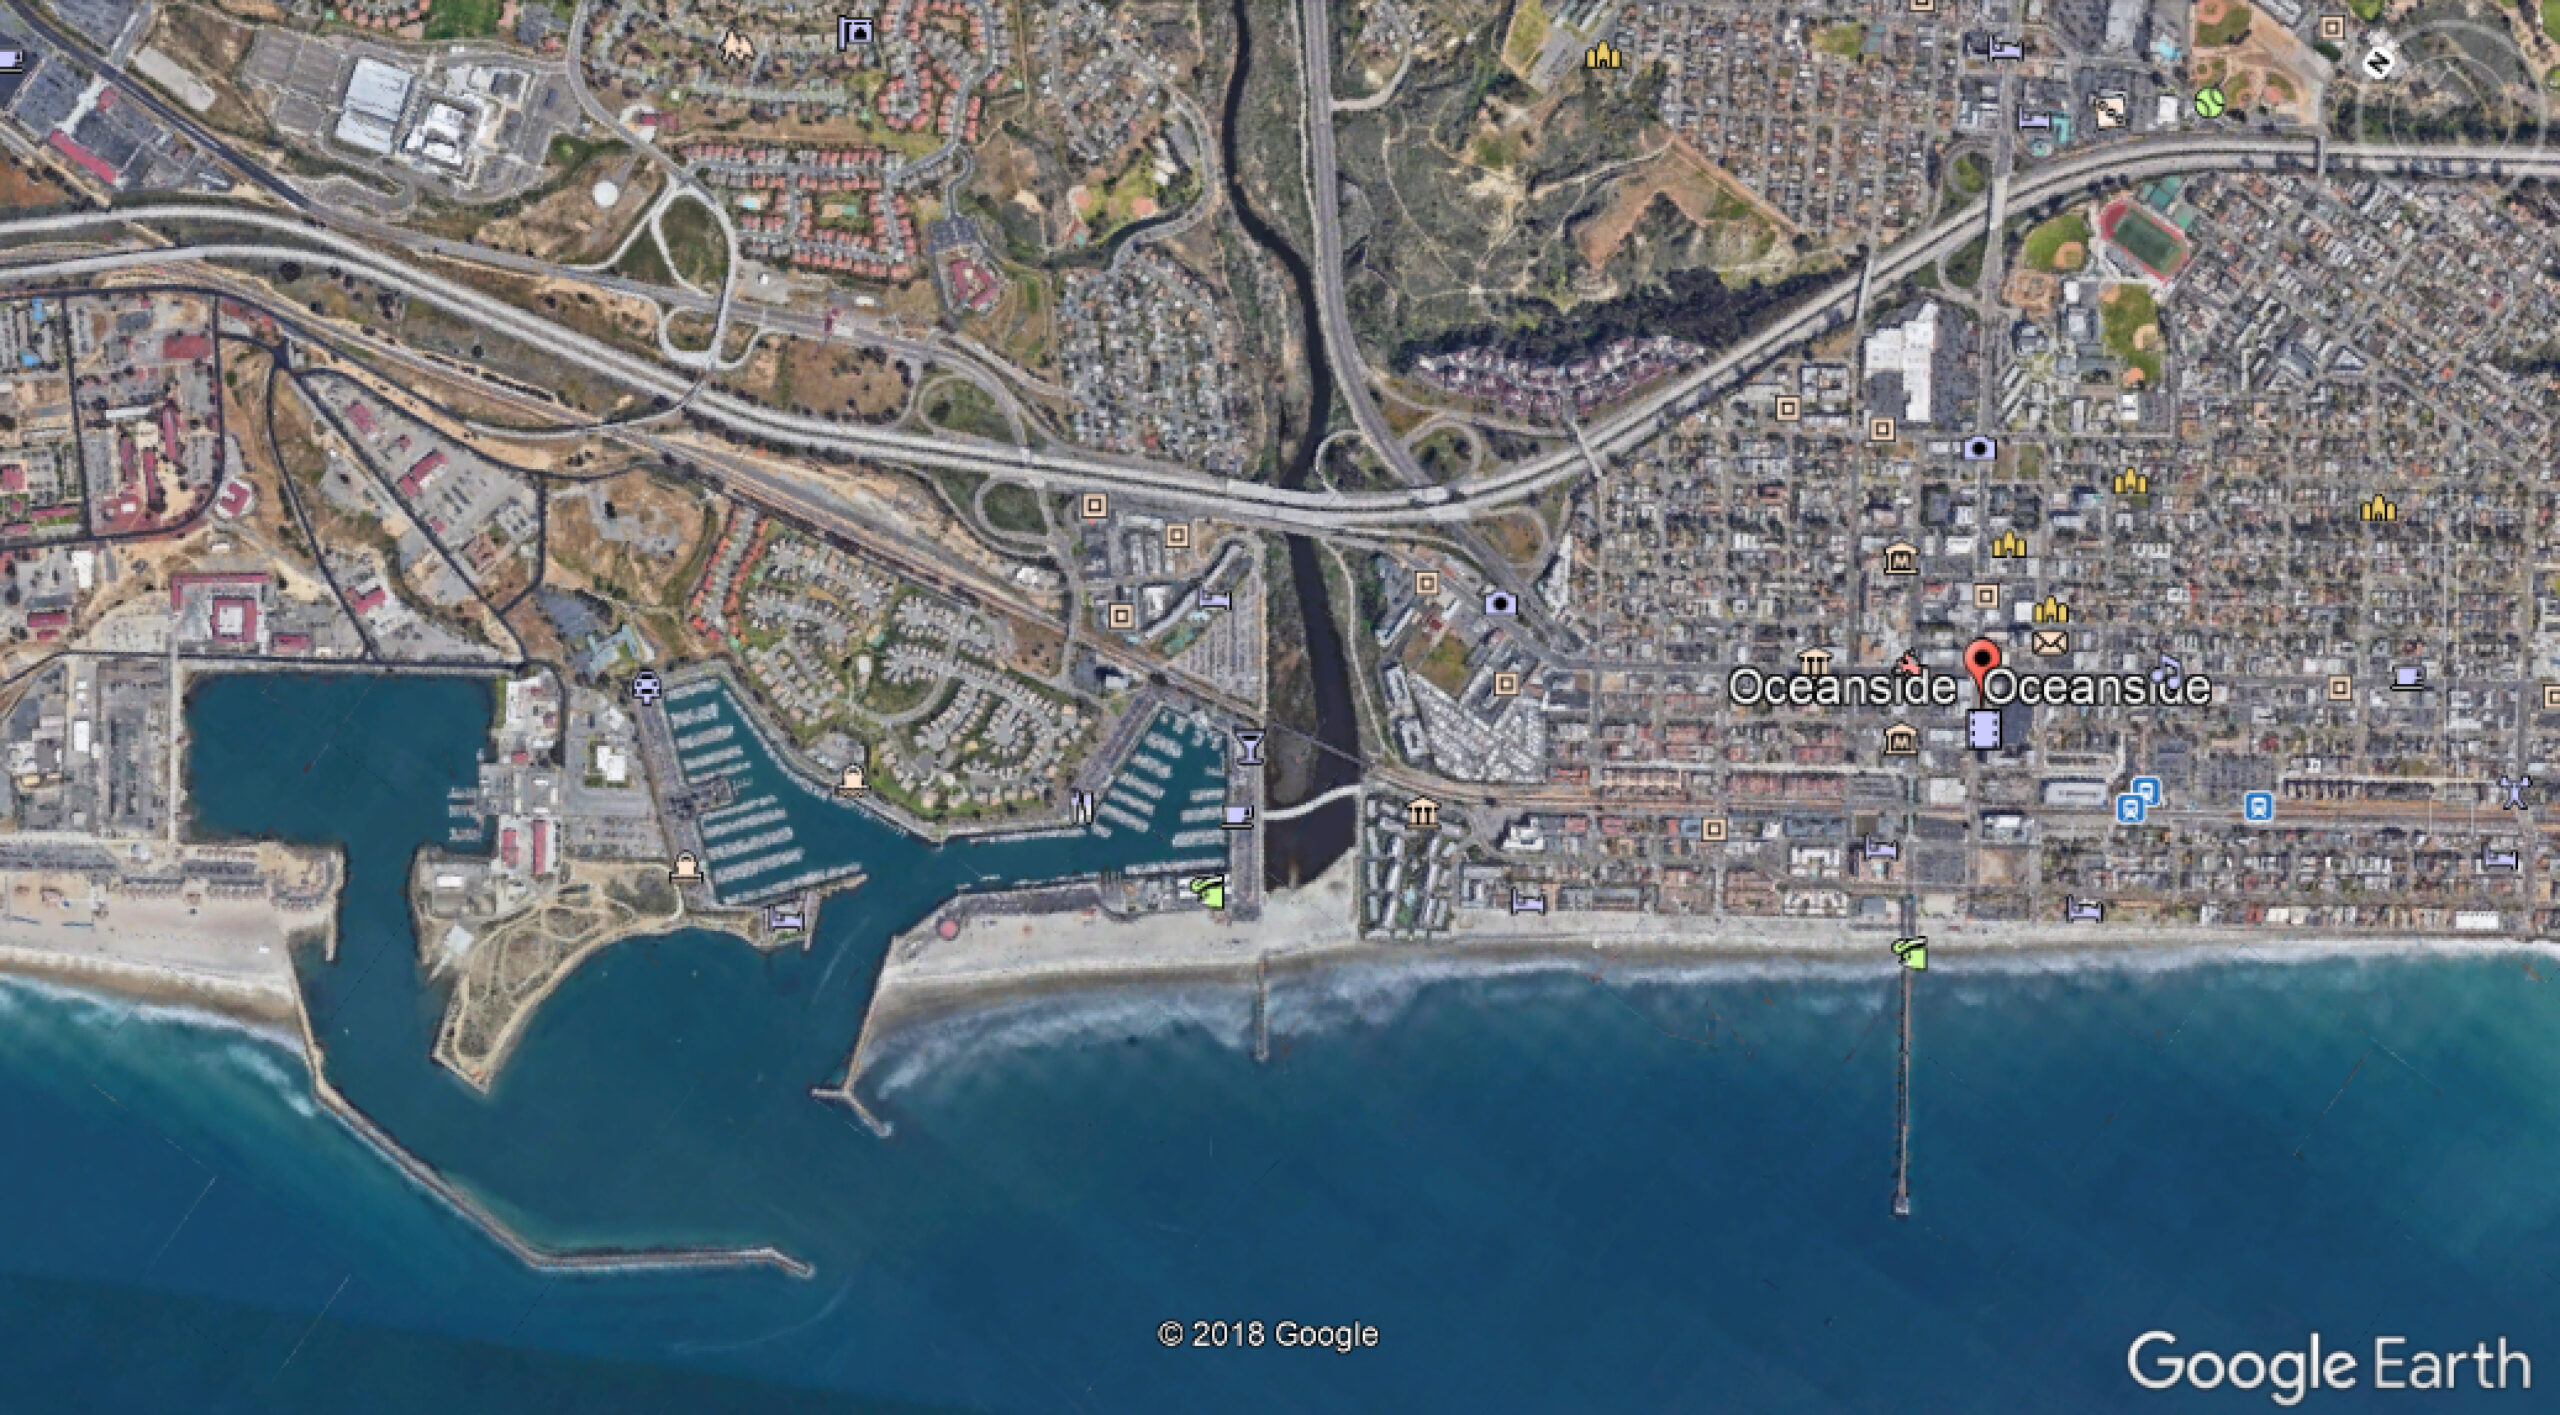 Screen shot from Google Earth showing the coast of Oceanside, California. From left to right you can see: 1) The 1942 Boat Basin; 2) The 1960s small boat harbor; 3) The 1961 groin at the mouth of the San Luis Rey River; and 4) the Oceanside pier. Note the buildup of sand on the upcoast sides of the boat basin (the beach on the far left side of the image) and the groin (the beach in the center), in addition to the much shorter beaches on the far right side of the image.